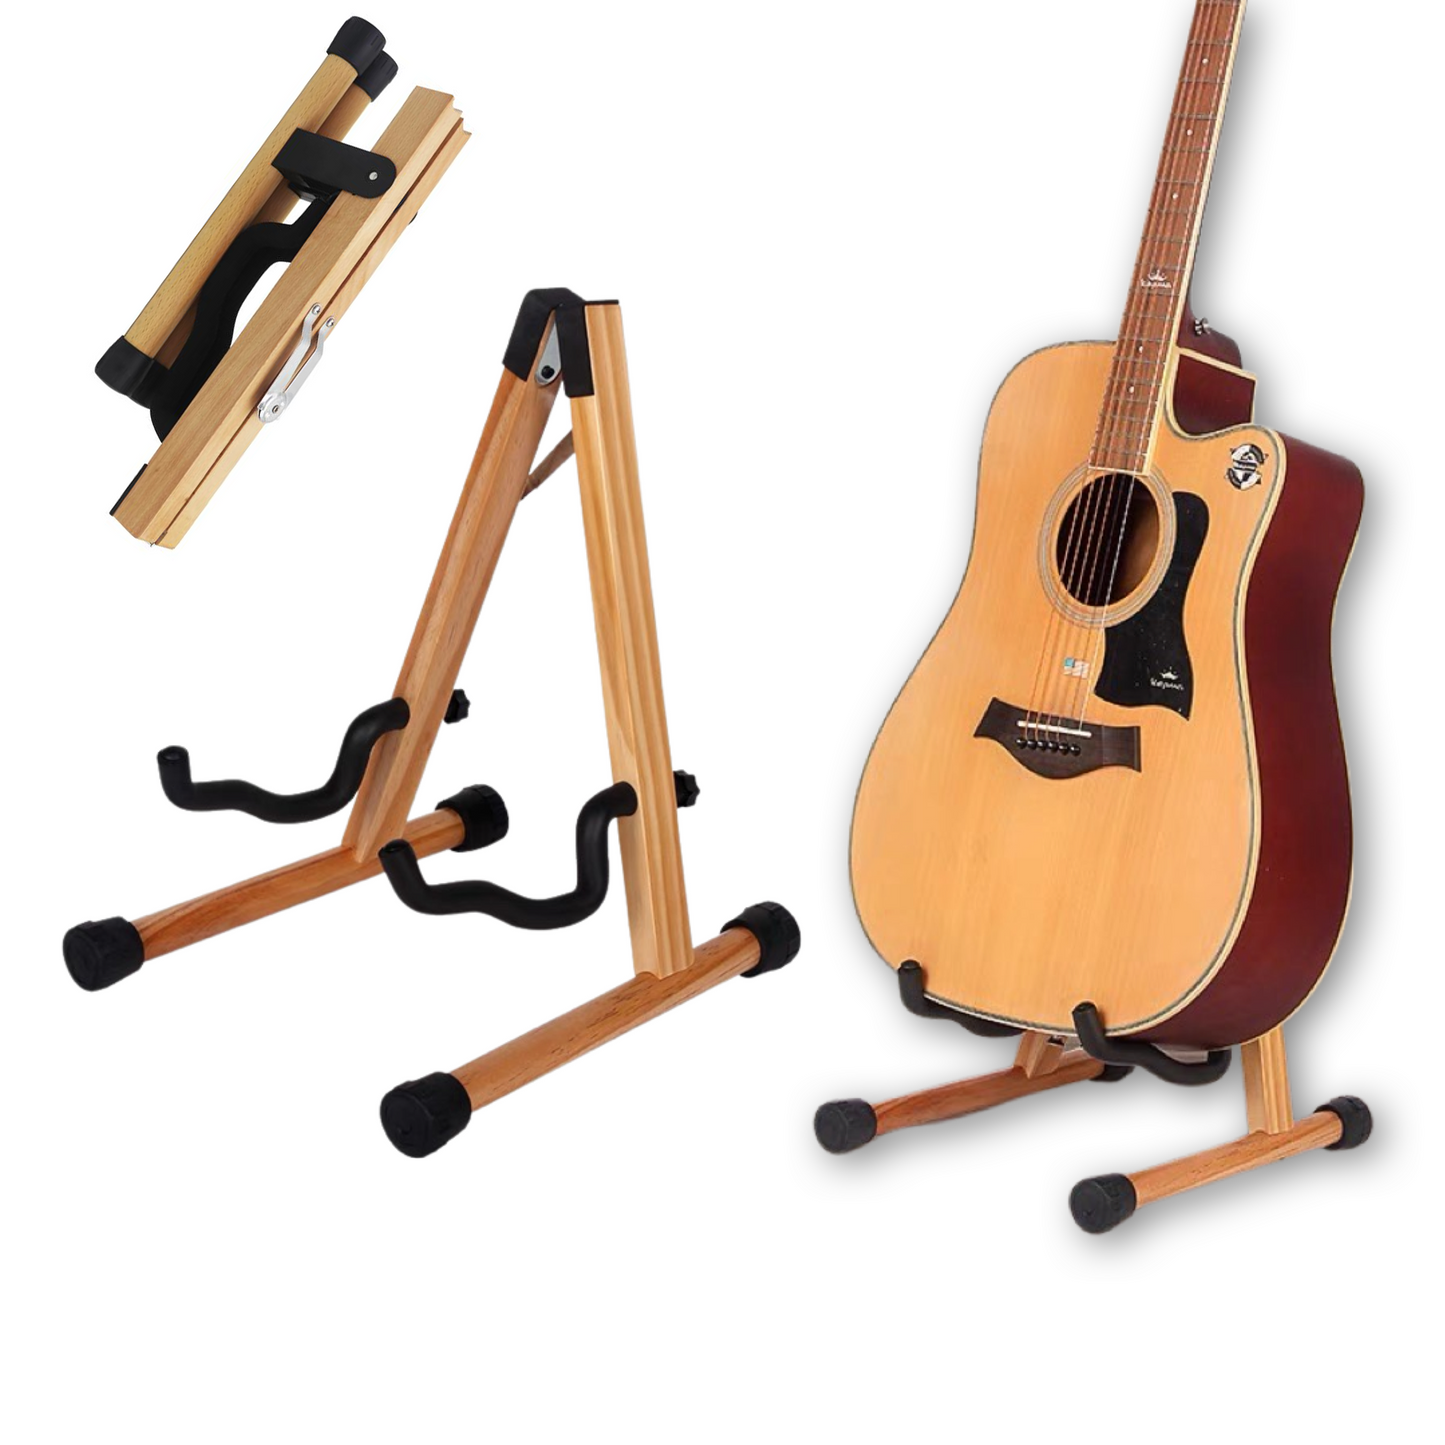 Wooden Guitar Stand A-Frame Folding, Fit Electric, Classical Guitars and Bass, Guitar Accessories